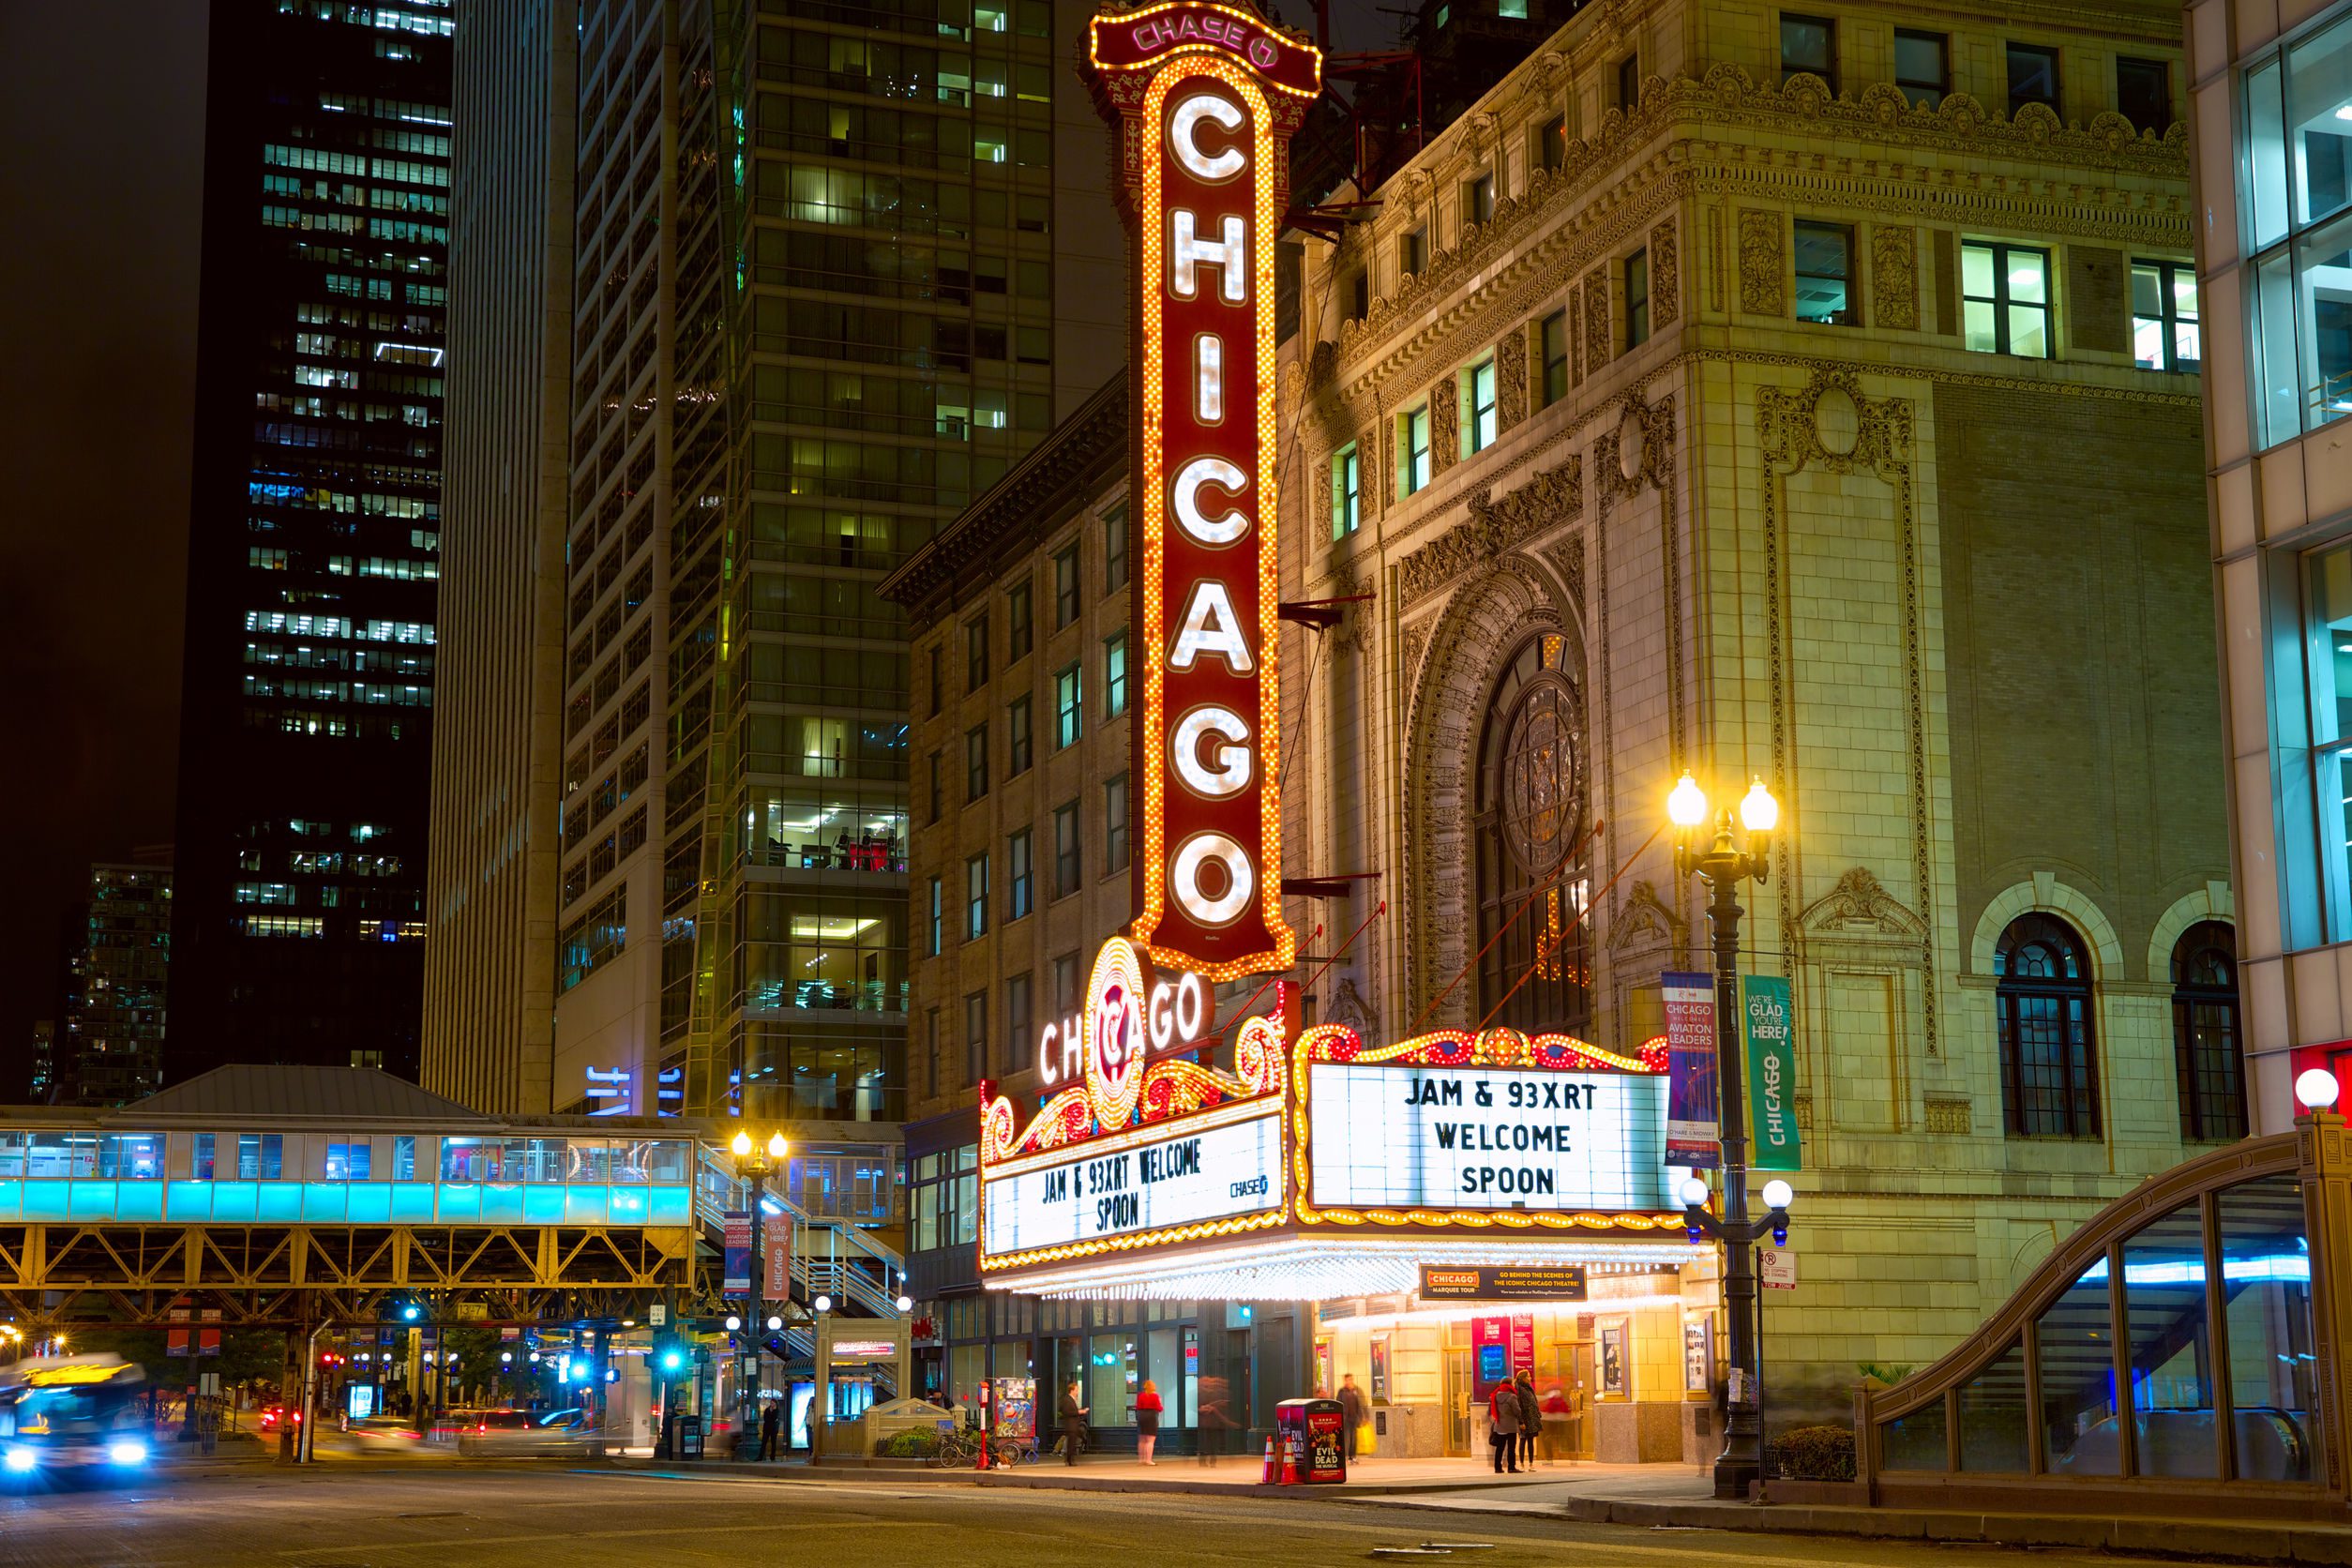 City view of Chicago Theater Marquee at night